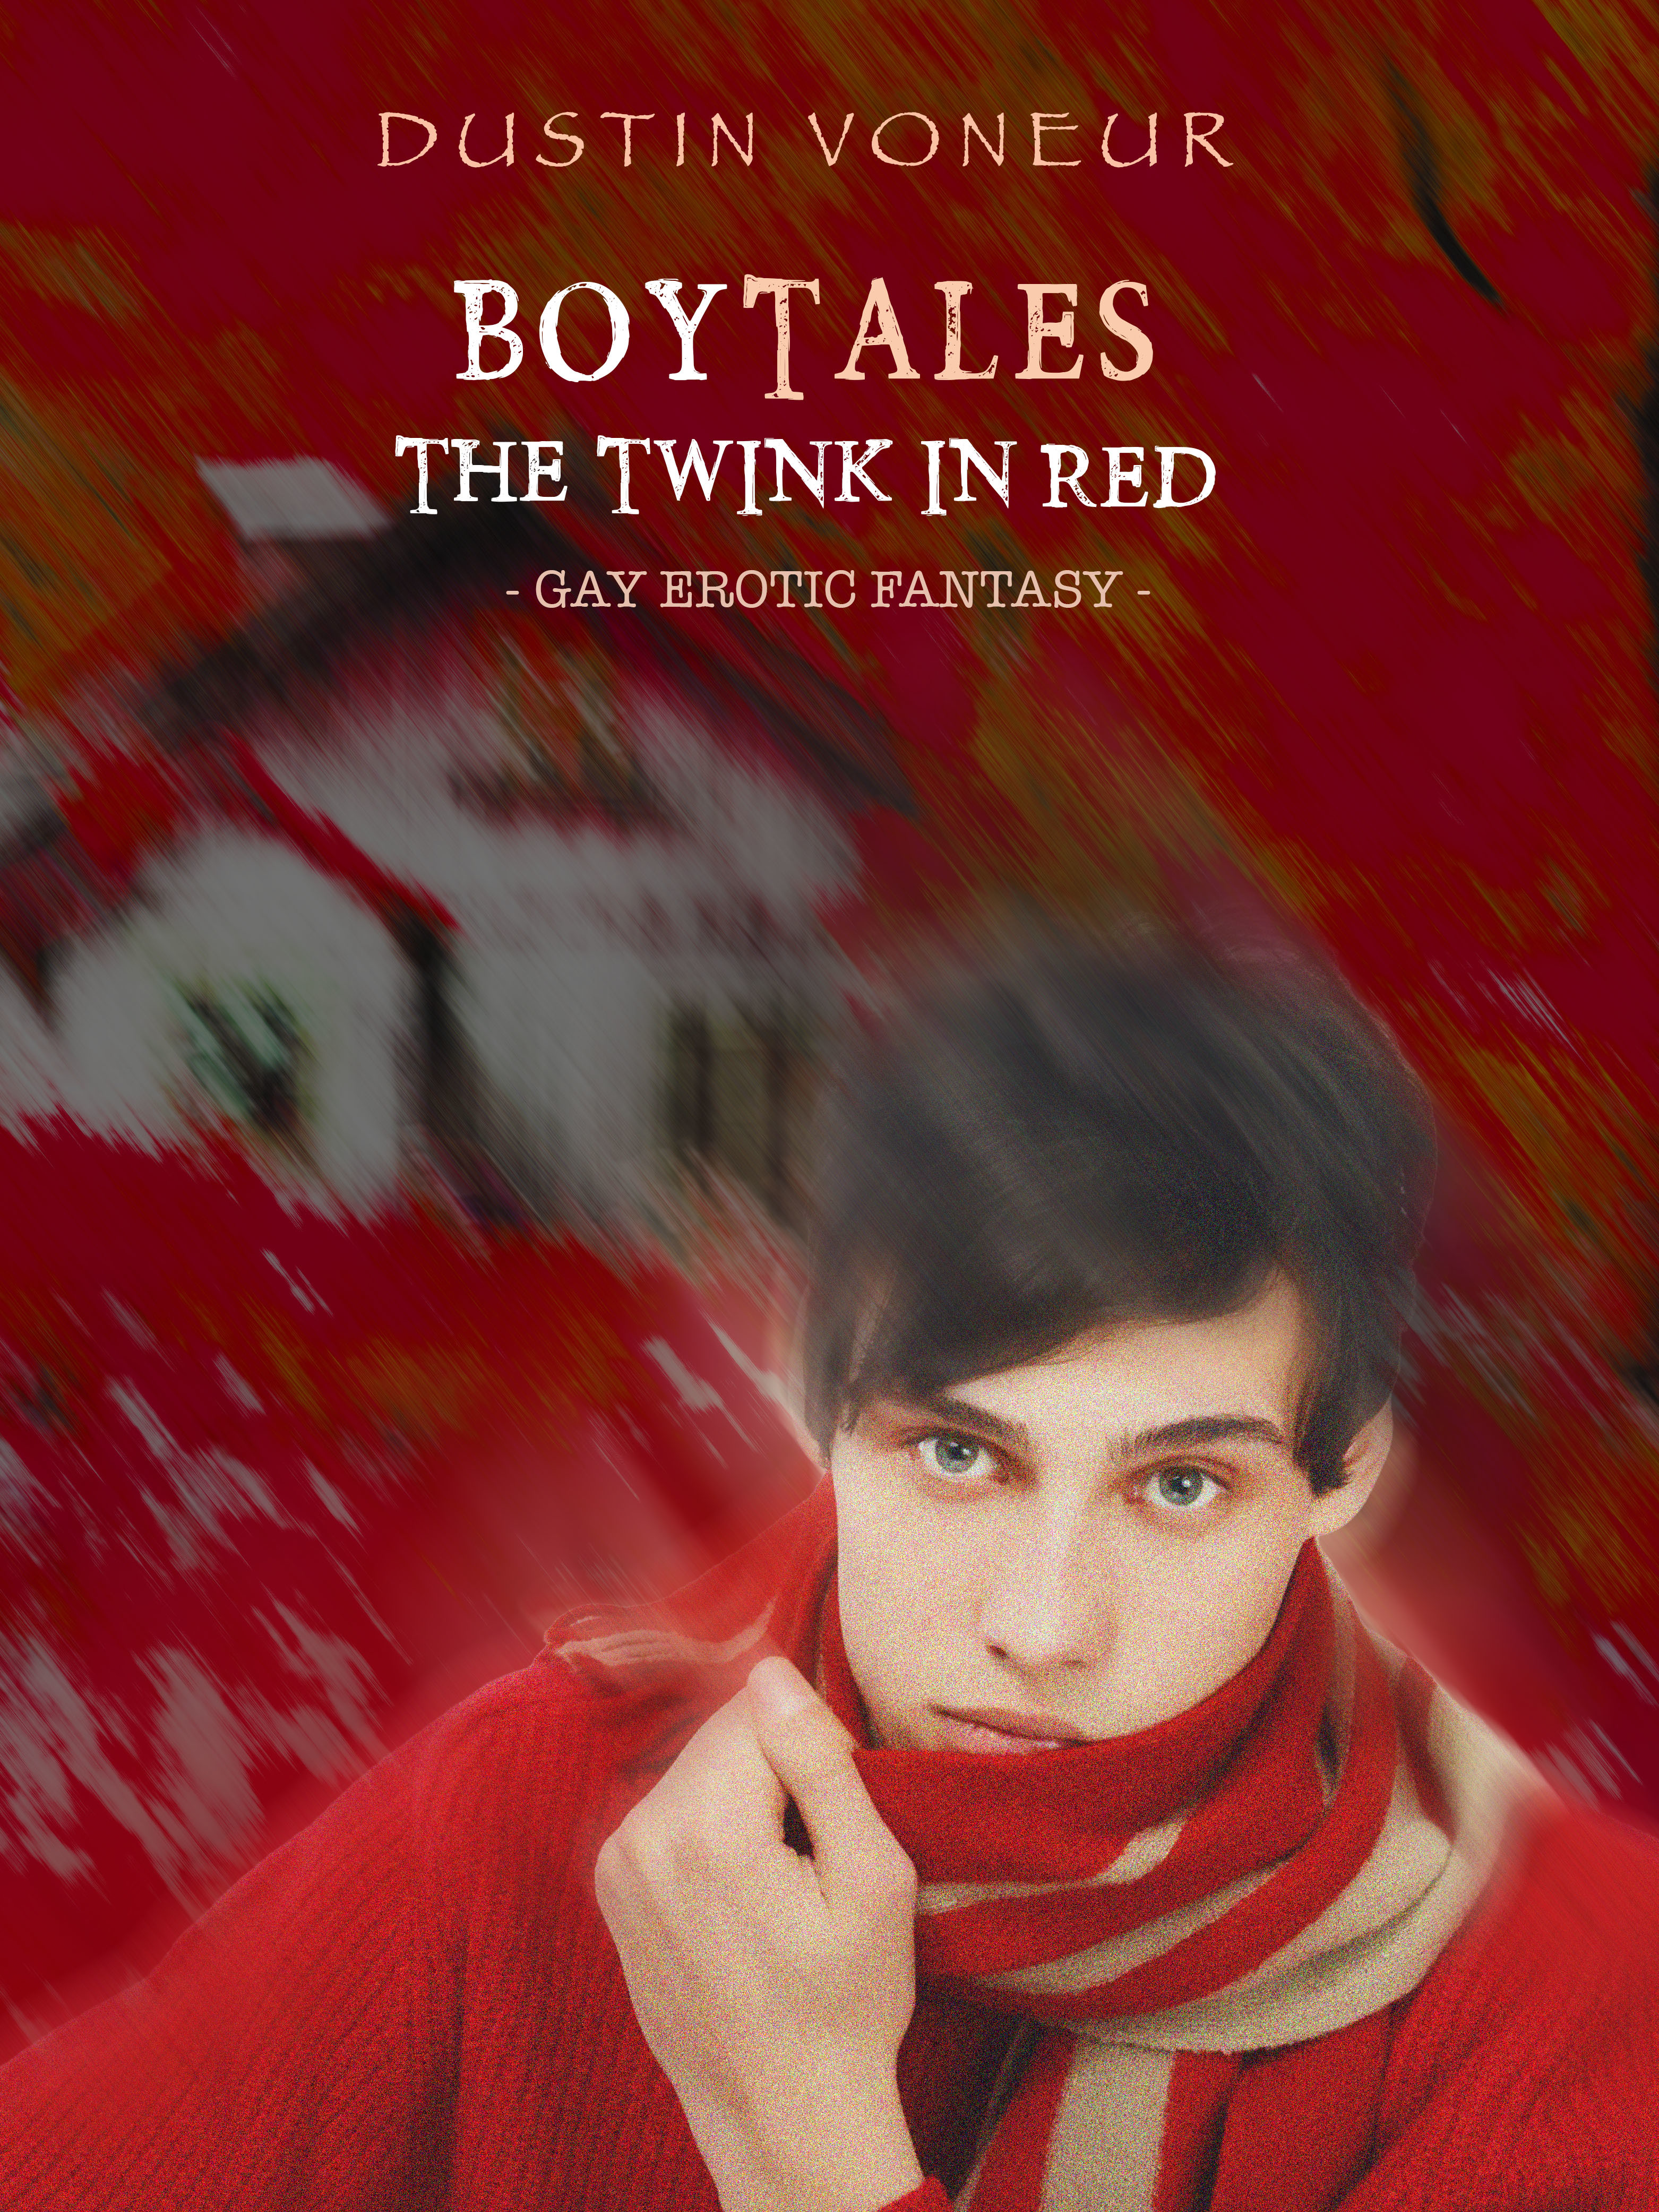 BoyTales: The Twink in Red